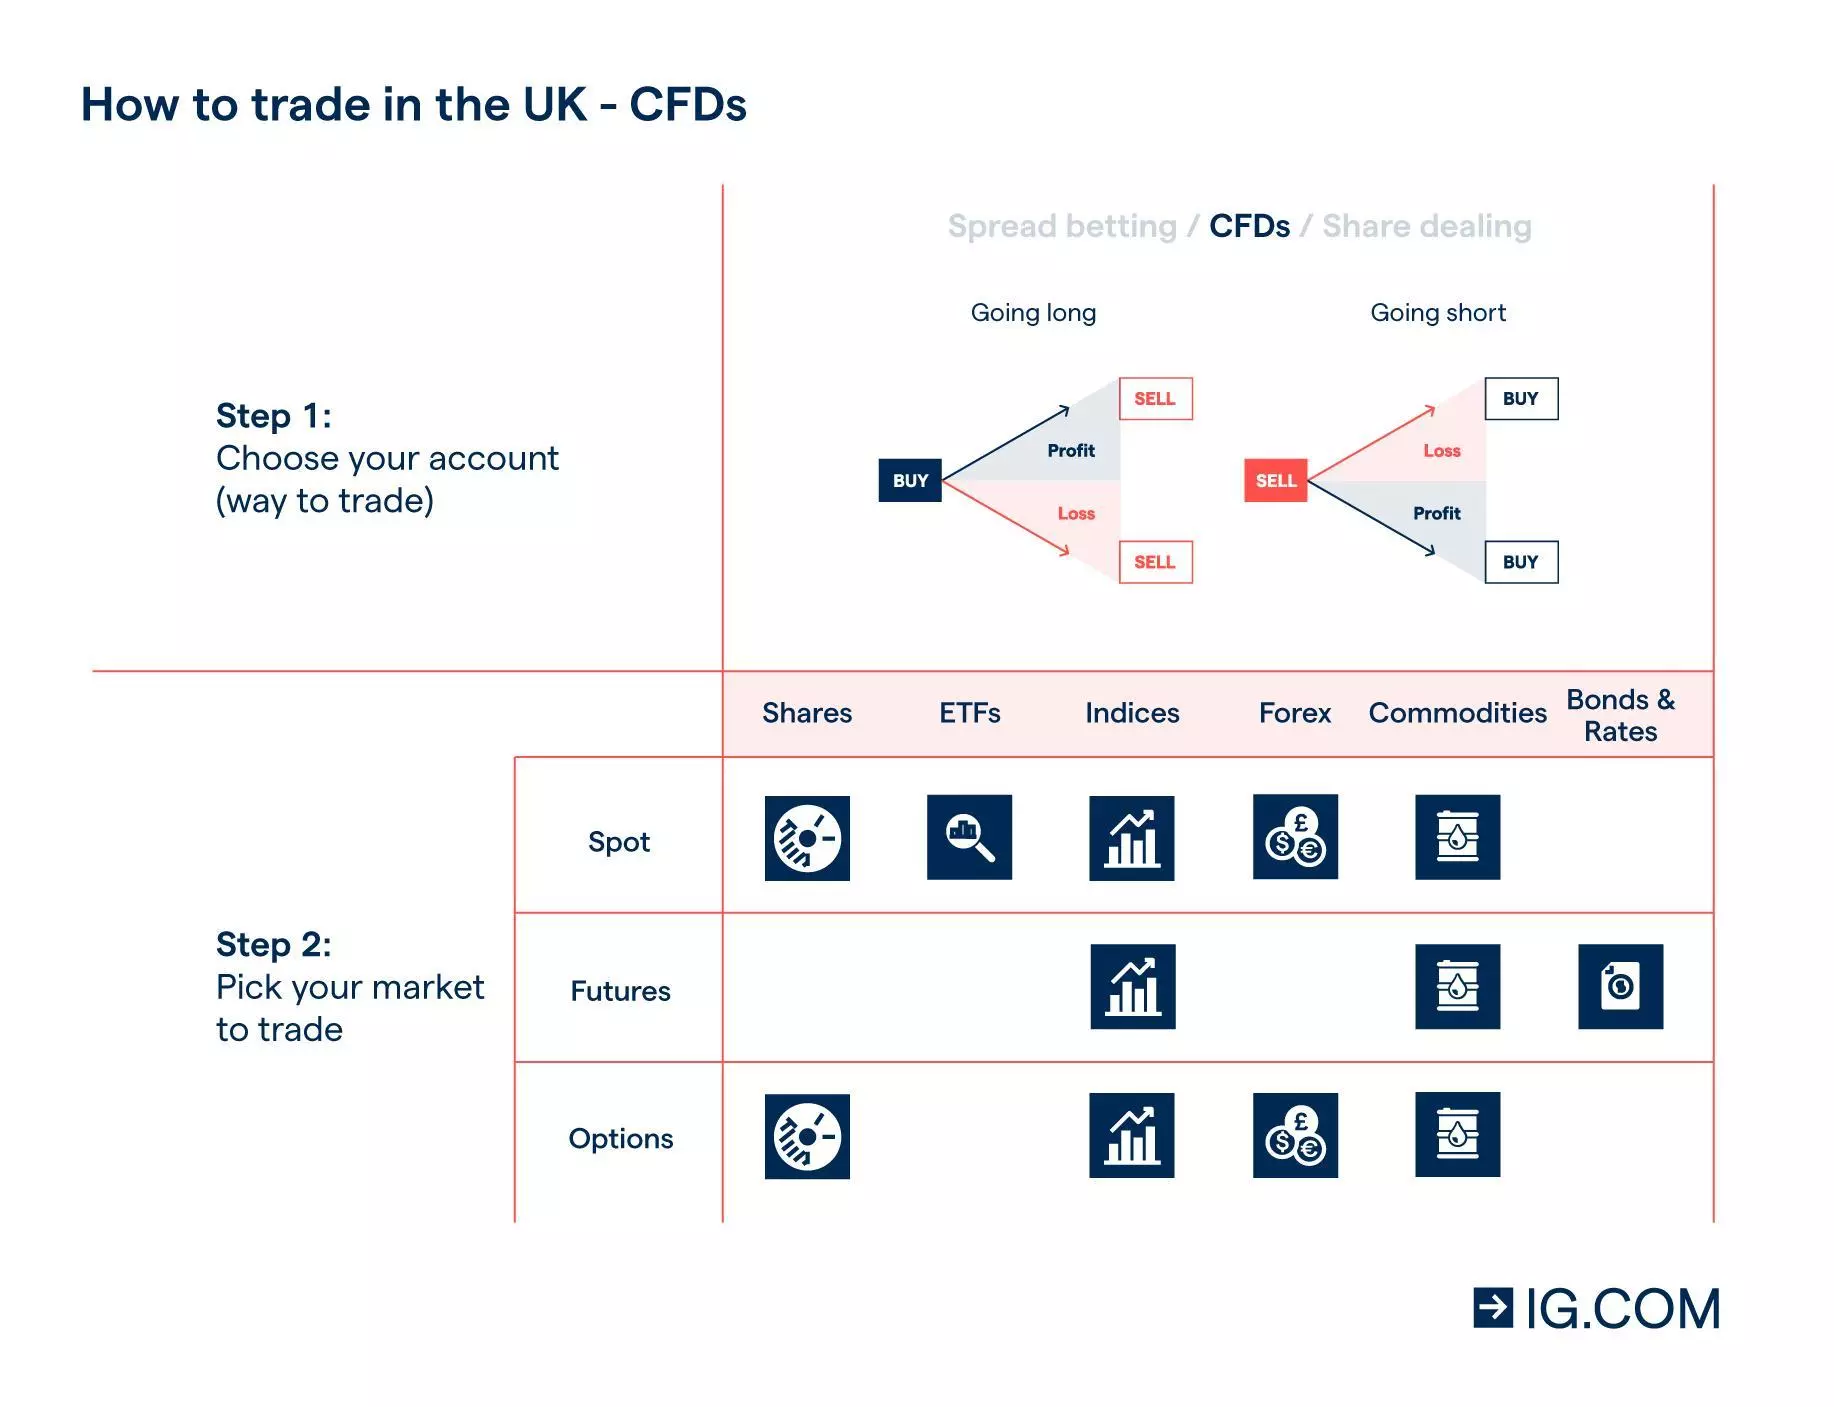 How to trade CFDs in the UK